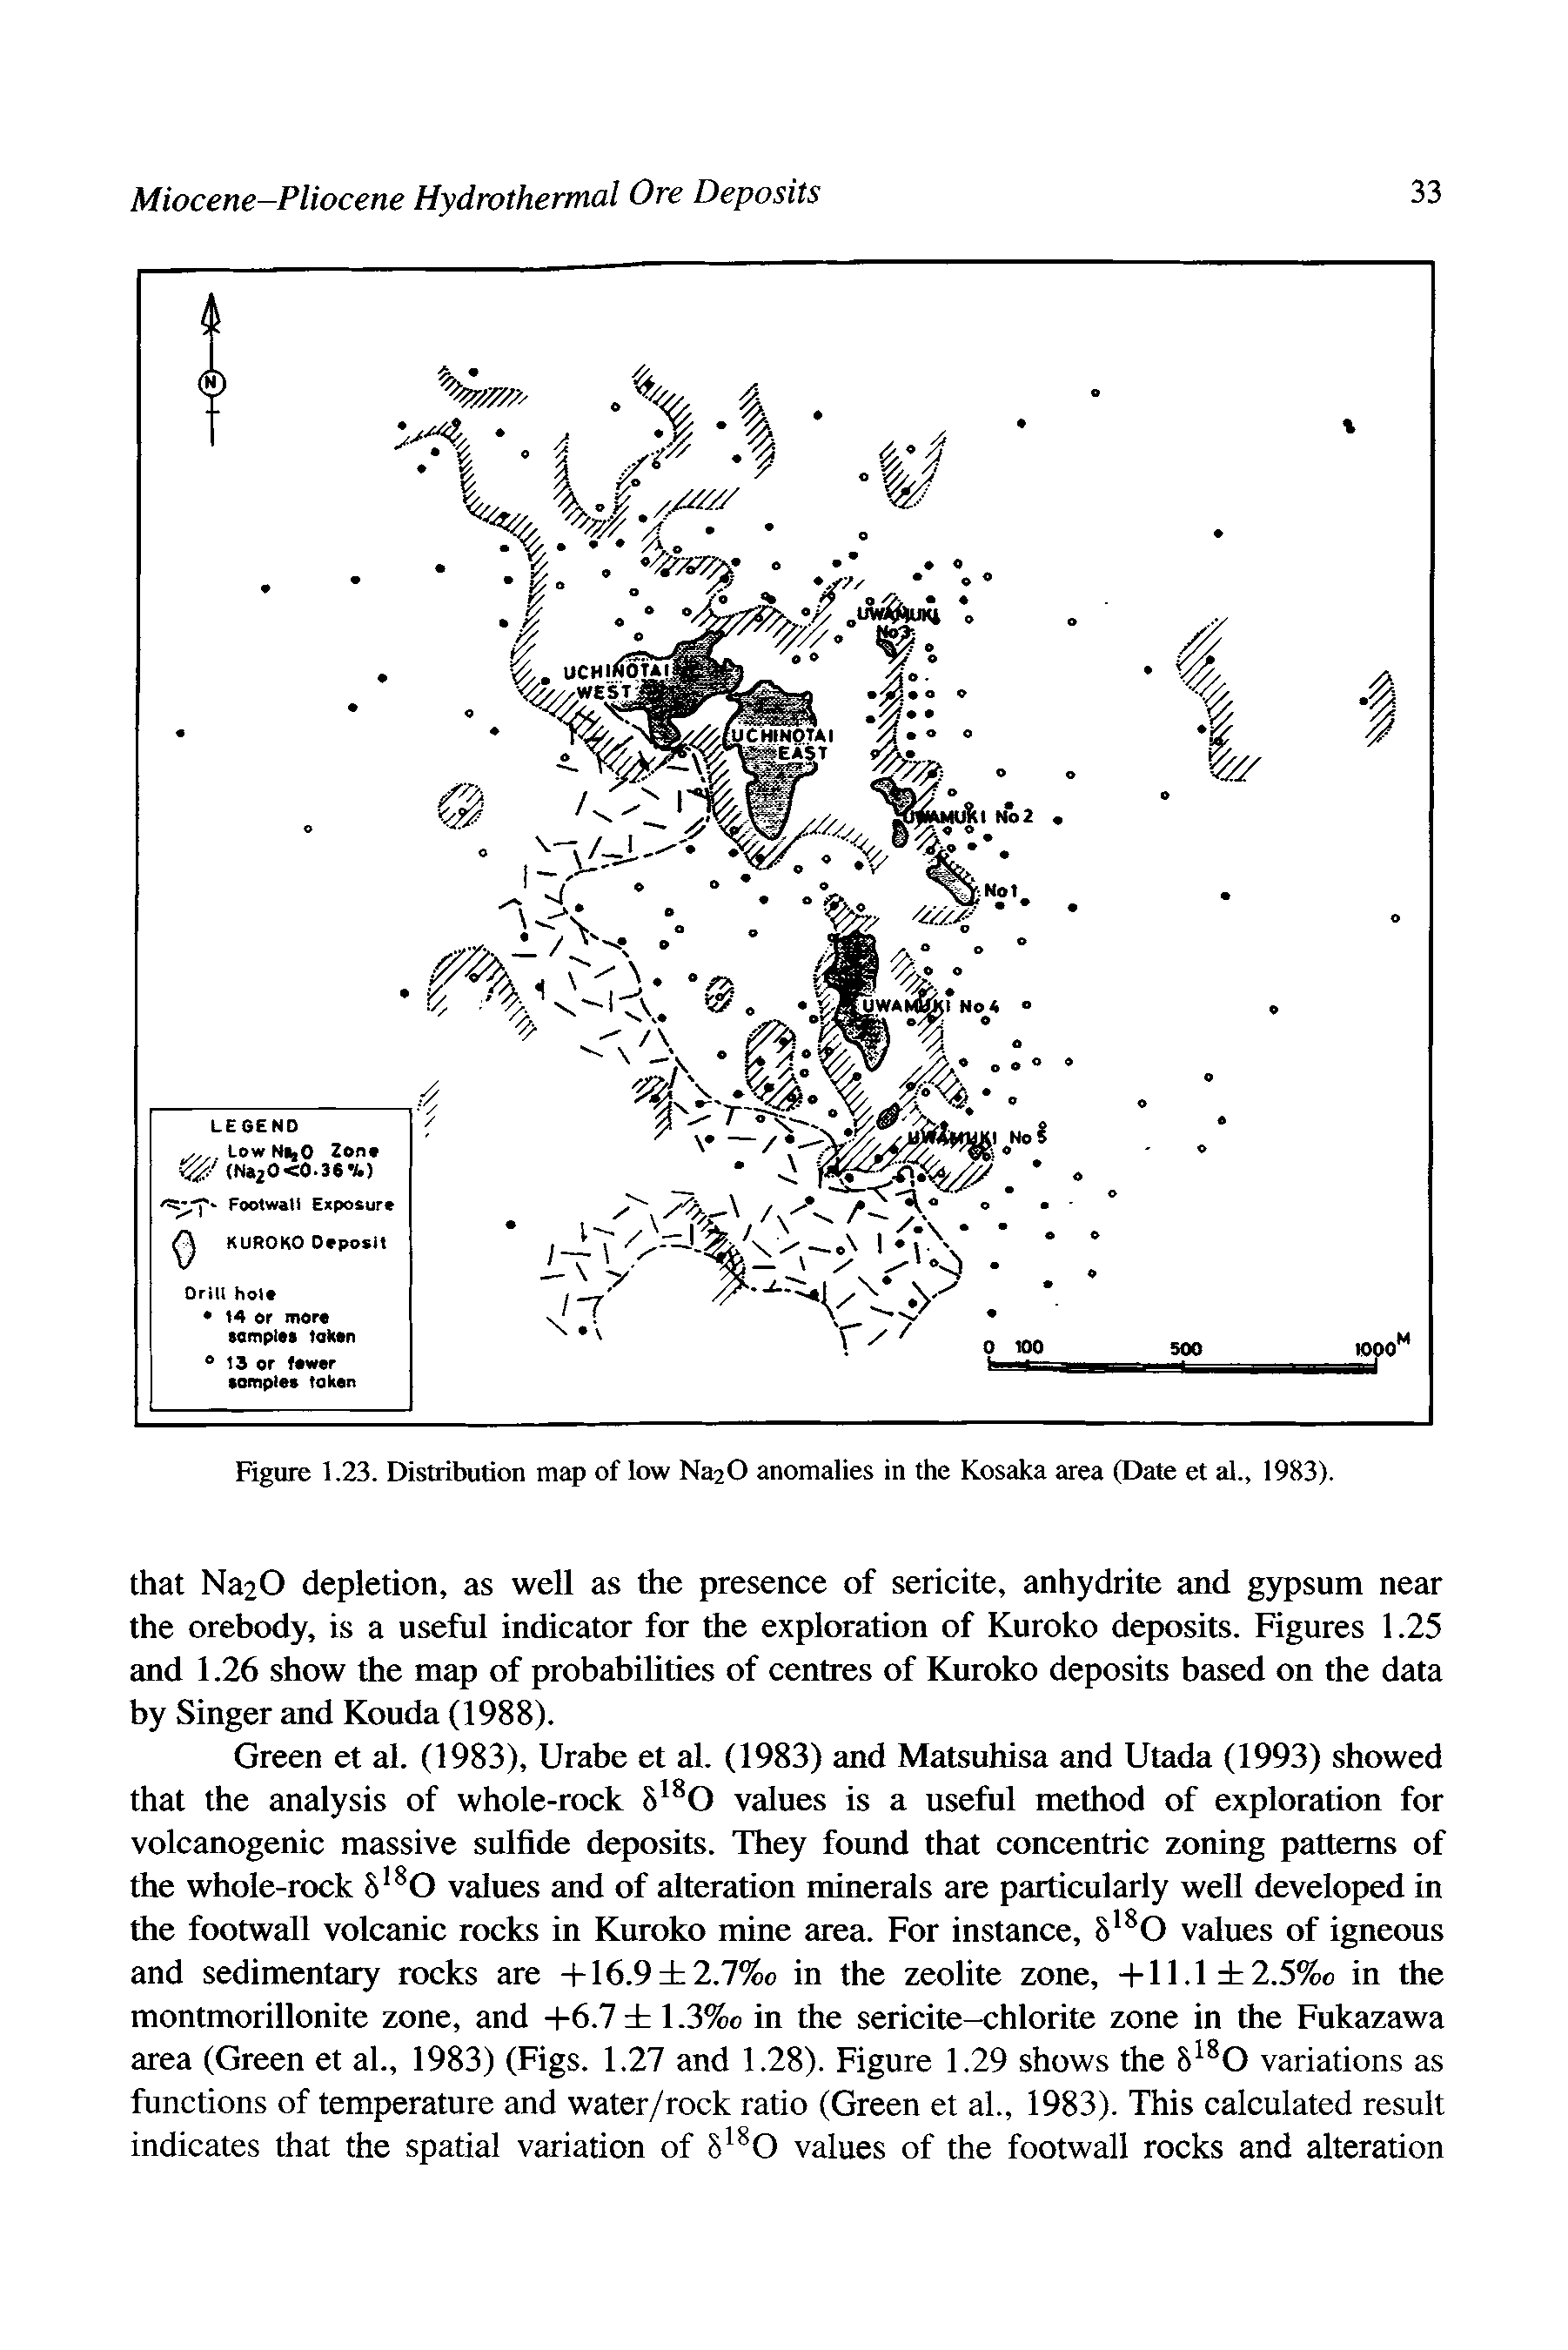 Figure 1.23. Distribution map of low Na20 anomalies in the Kosaka area (Date et al., 1983).